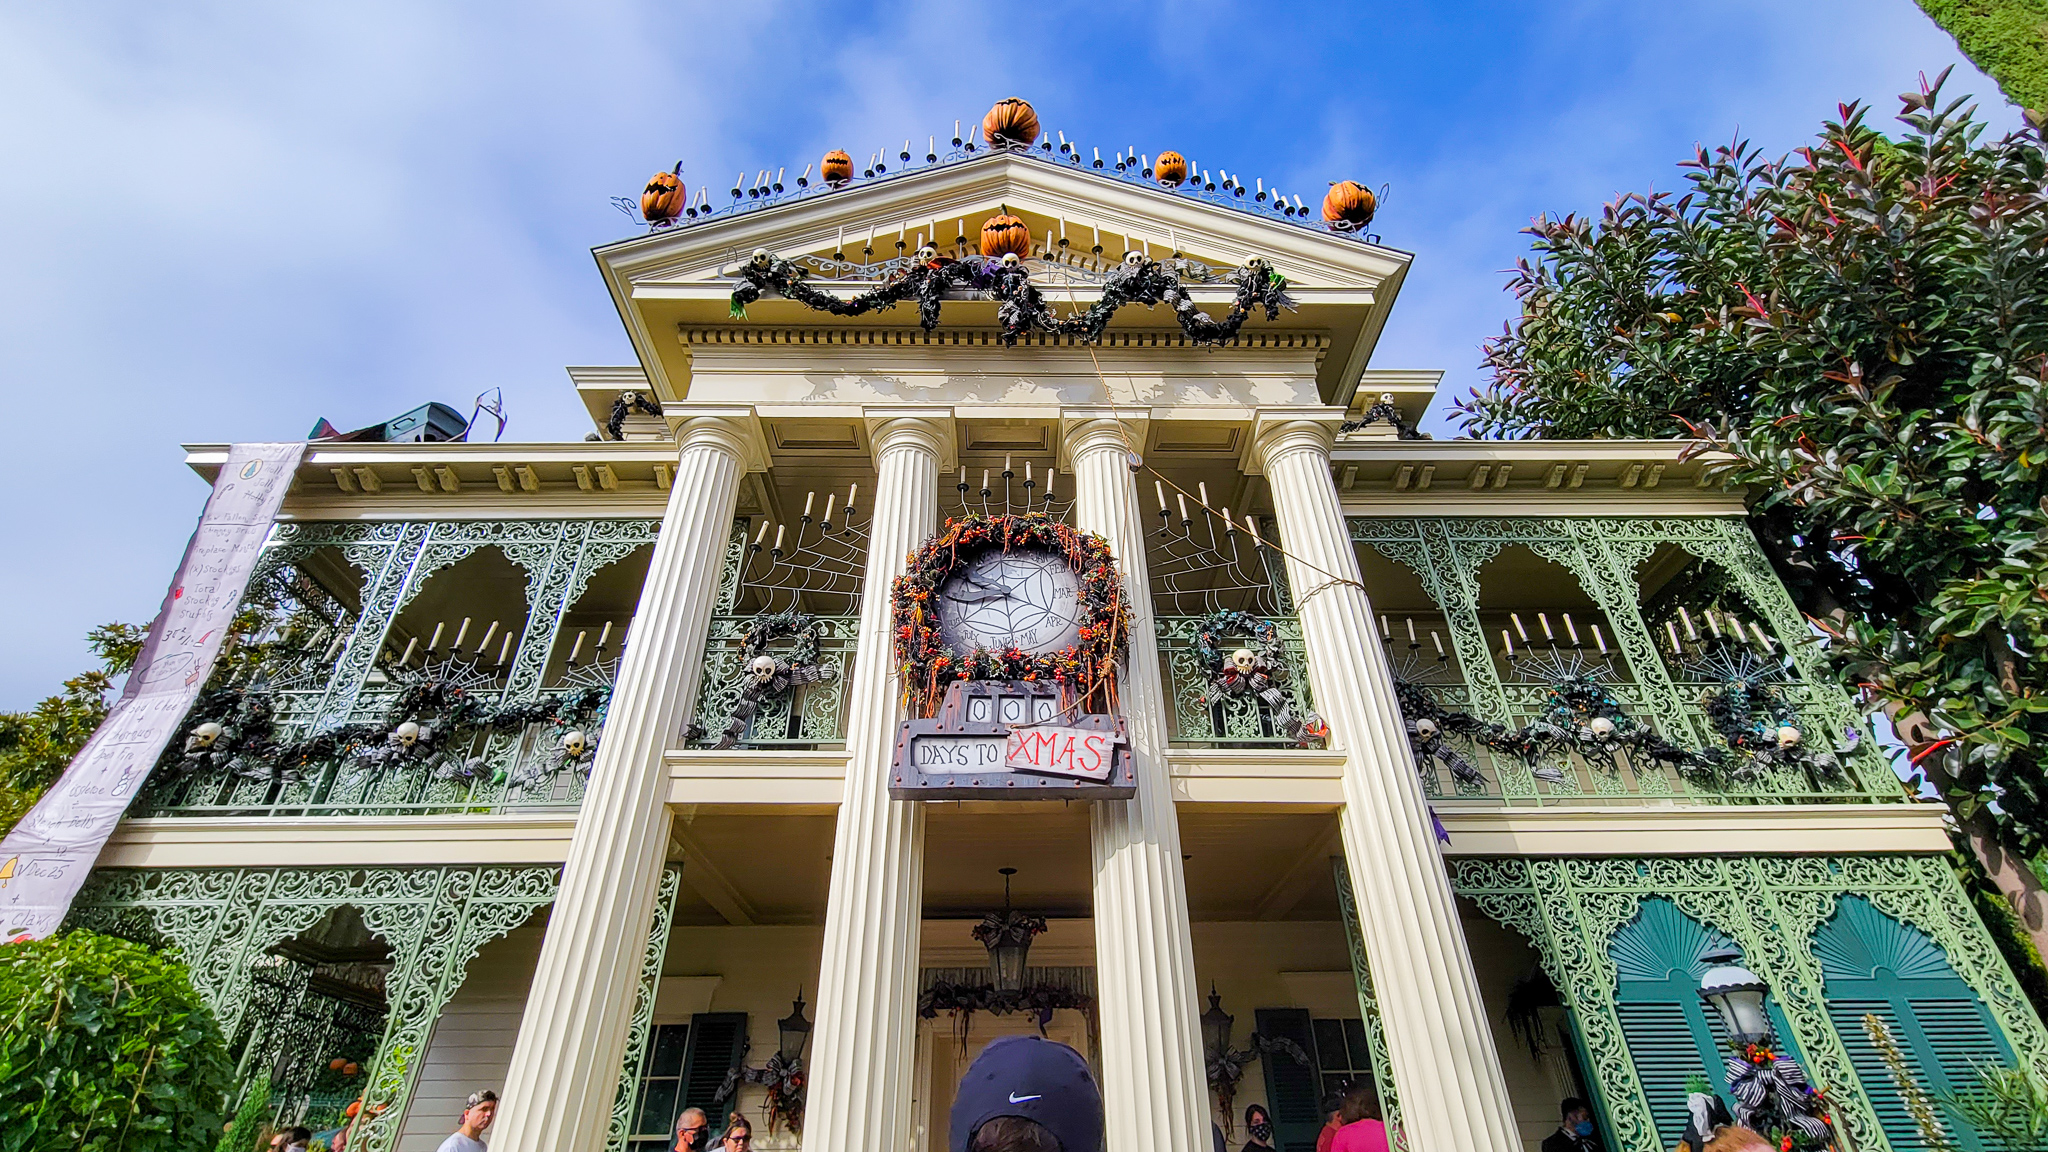 what holidays does disneyland decorate for